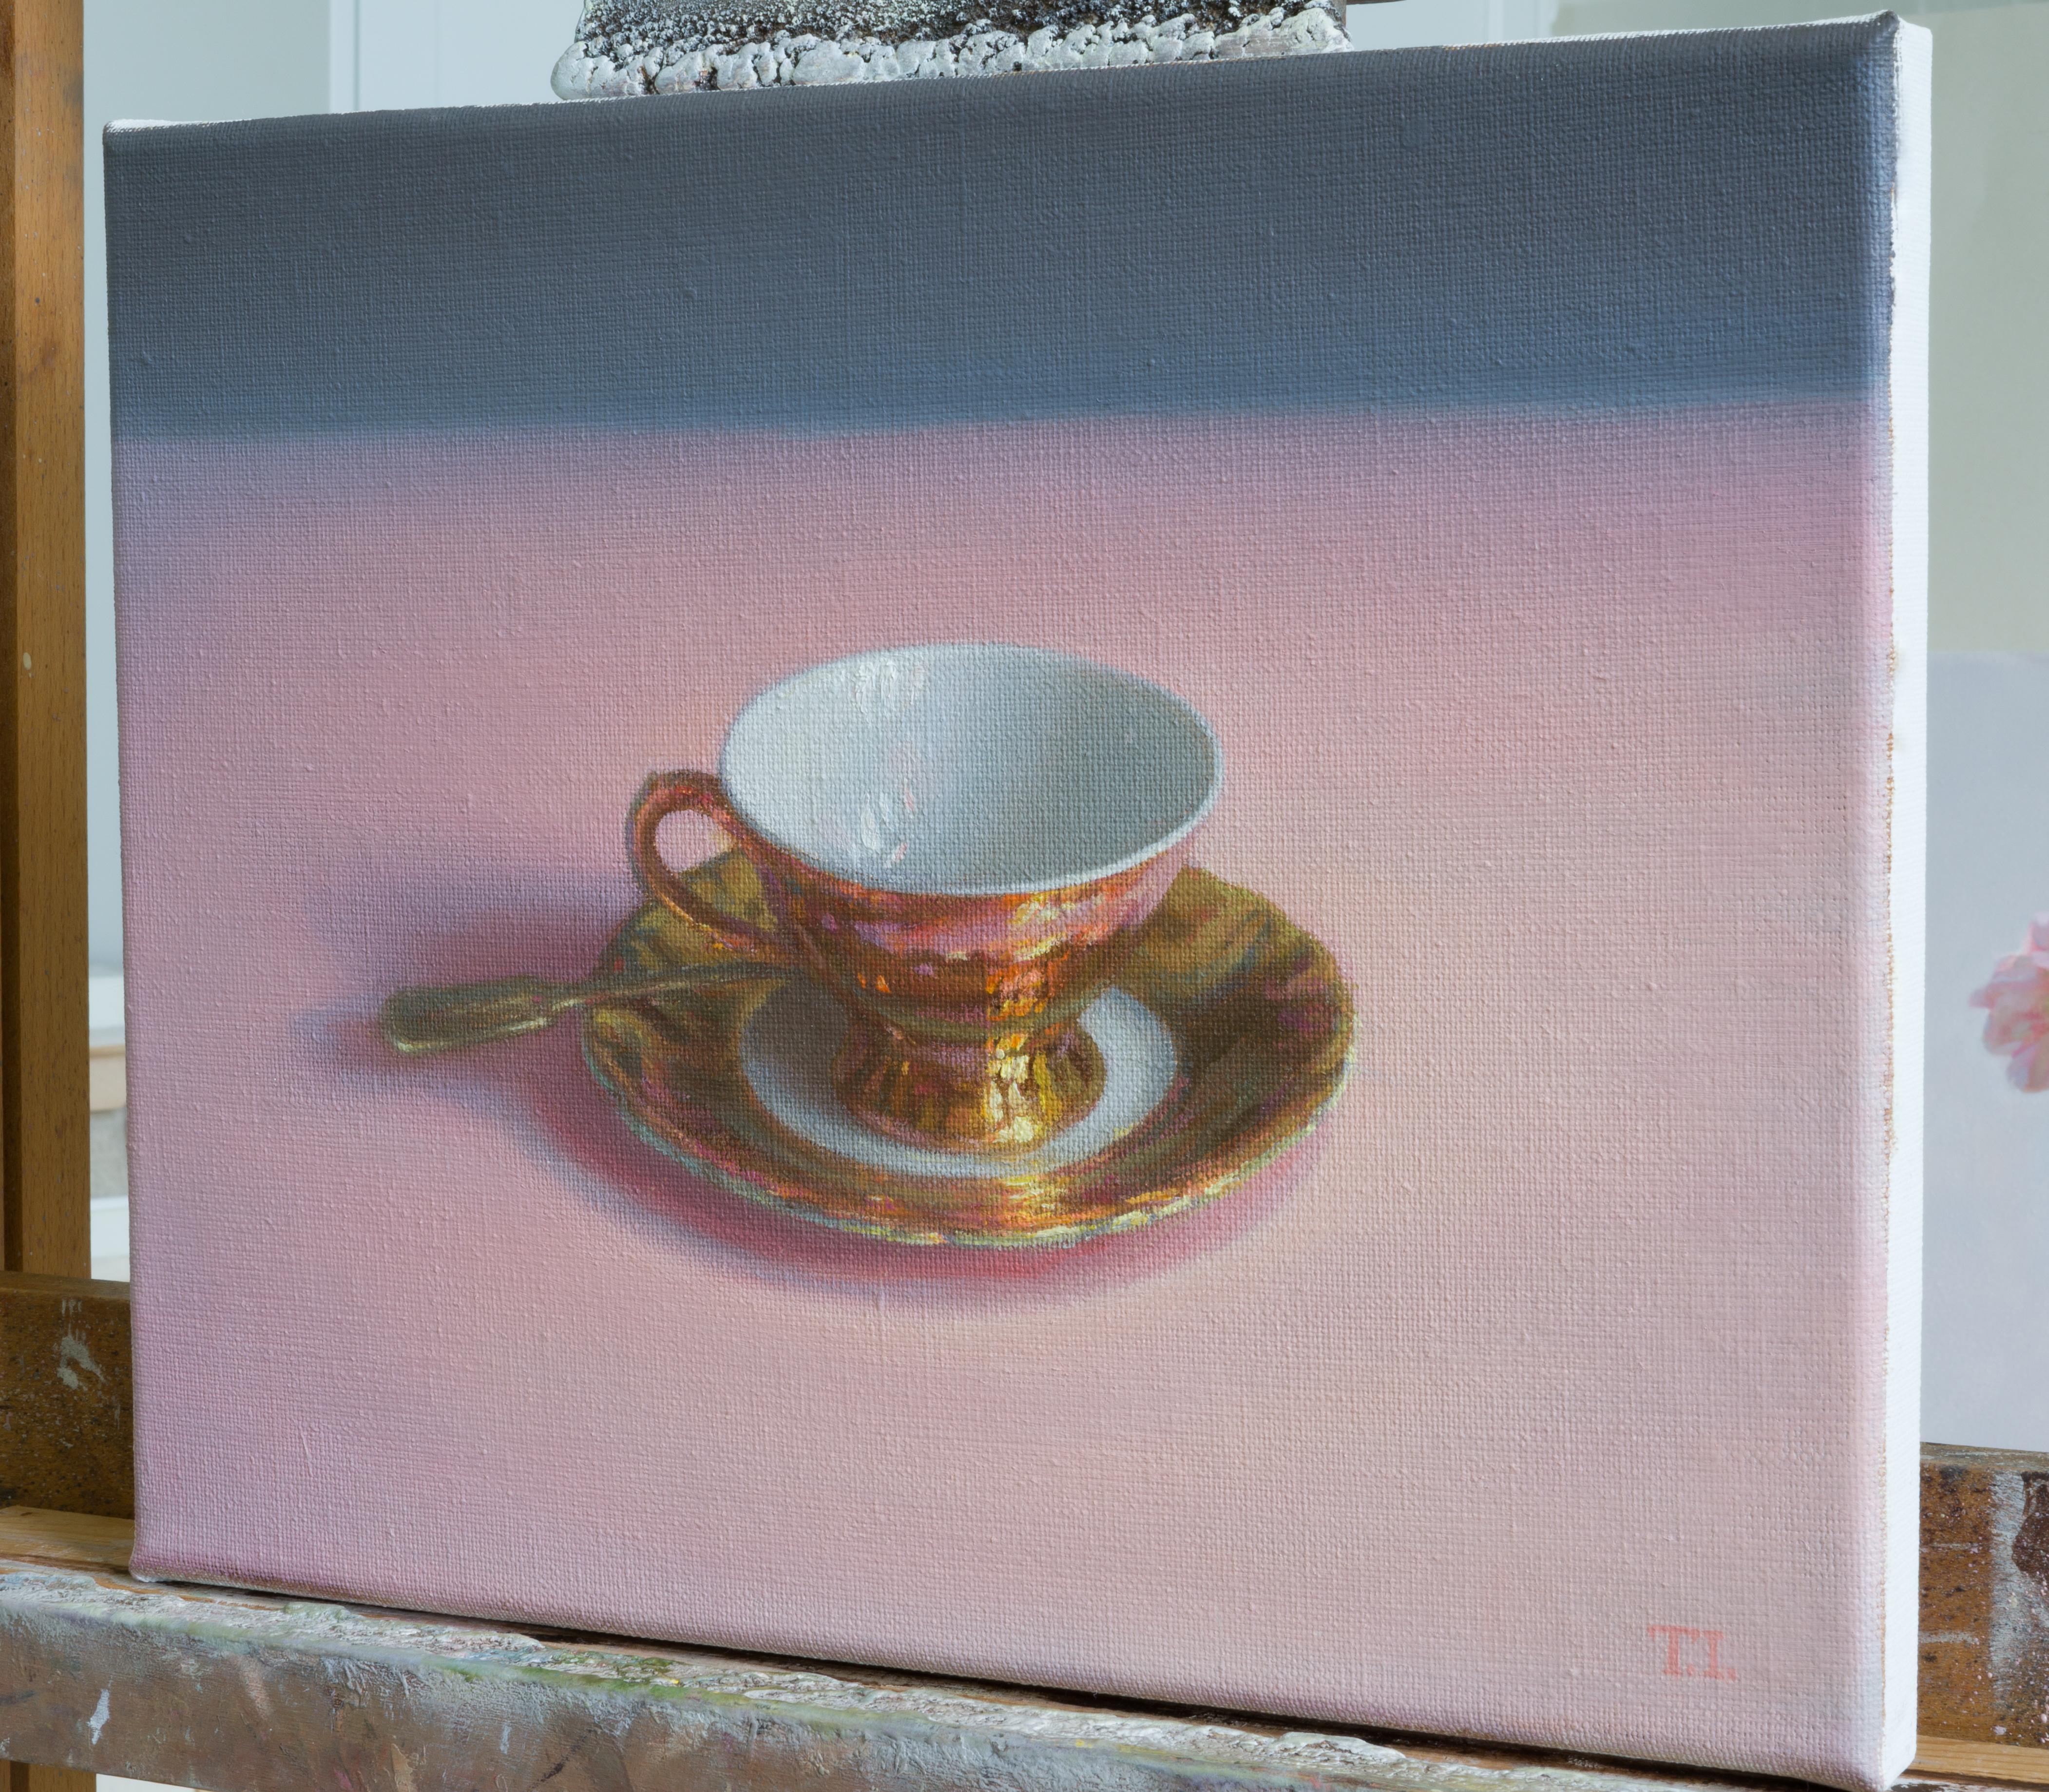 Coffee cup on pink tablecloth - Realist Painting by Irina Trushkova